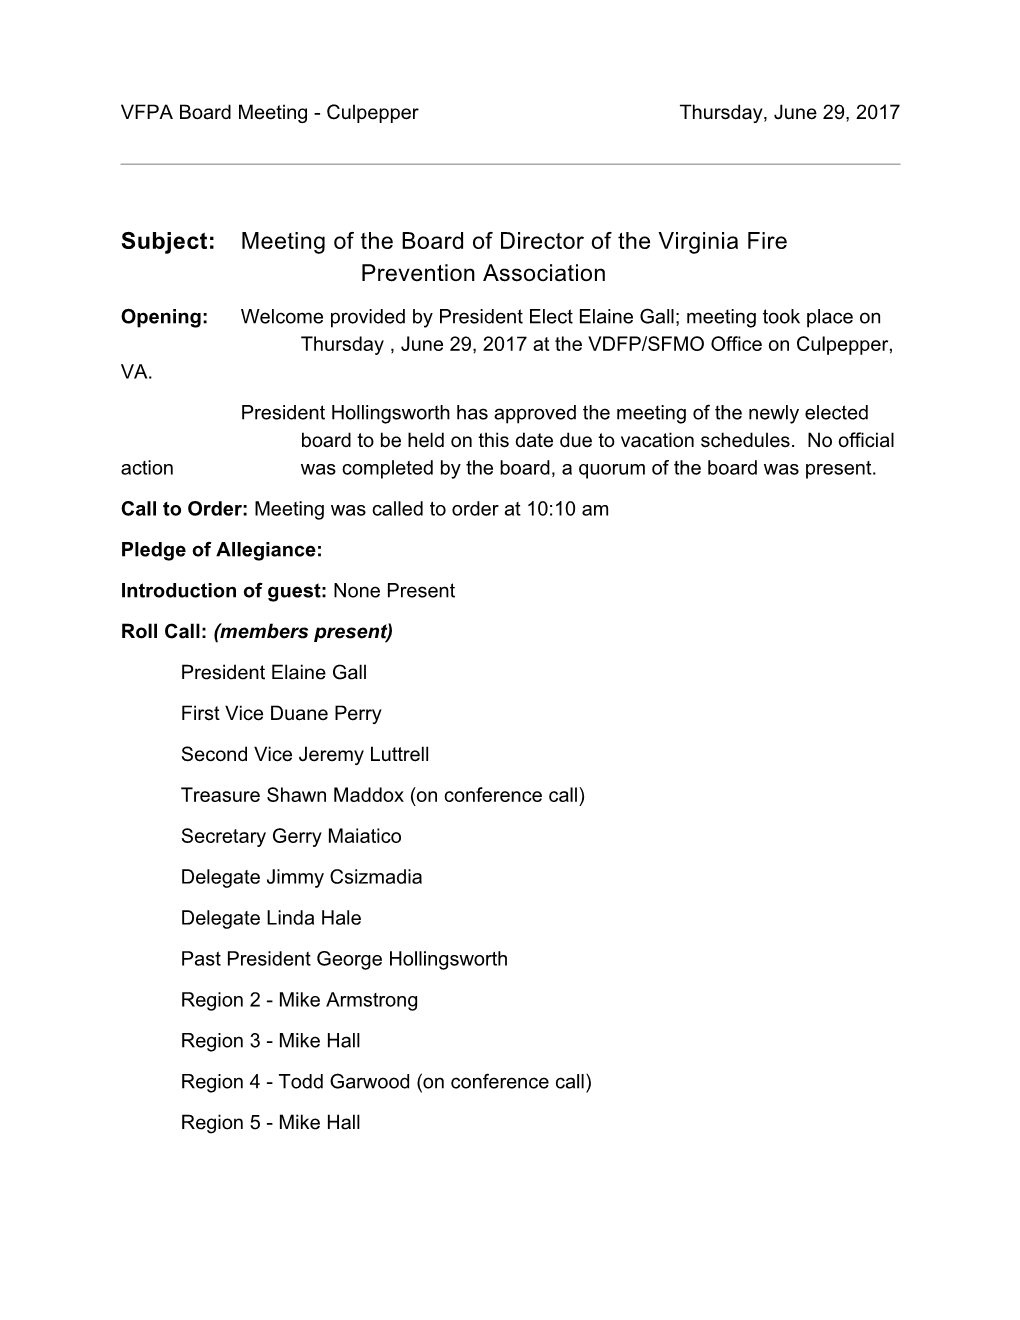 Subject: Meeting of the Board of Director of the Virginia Fire Prevention Association